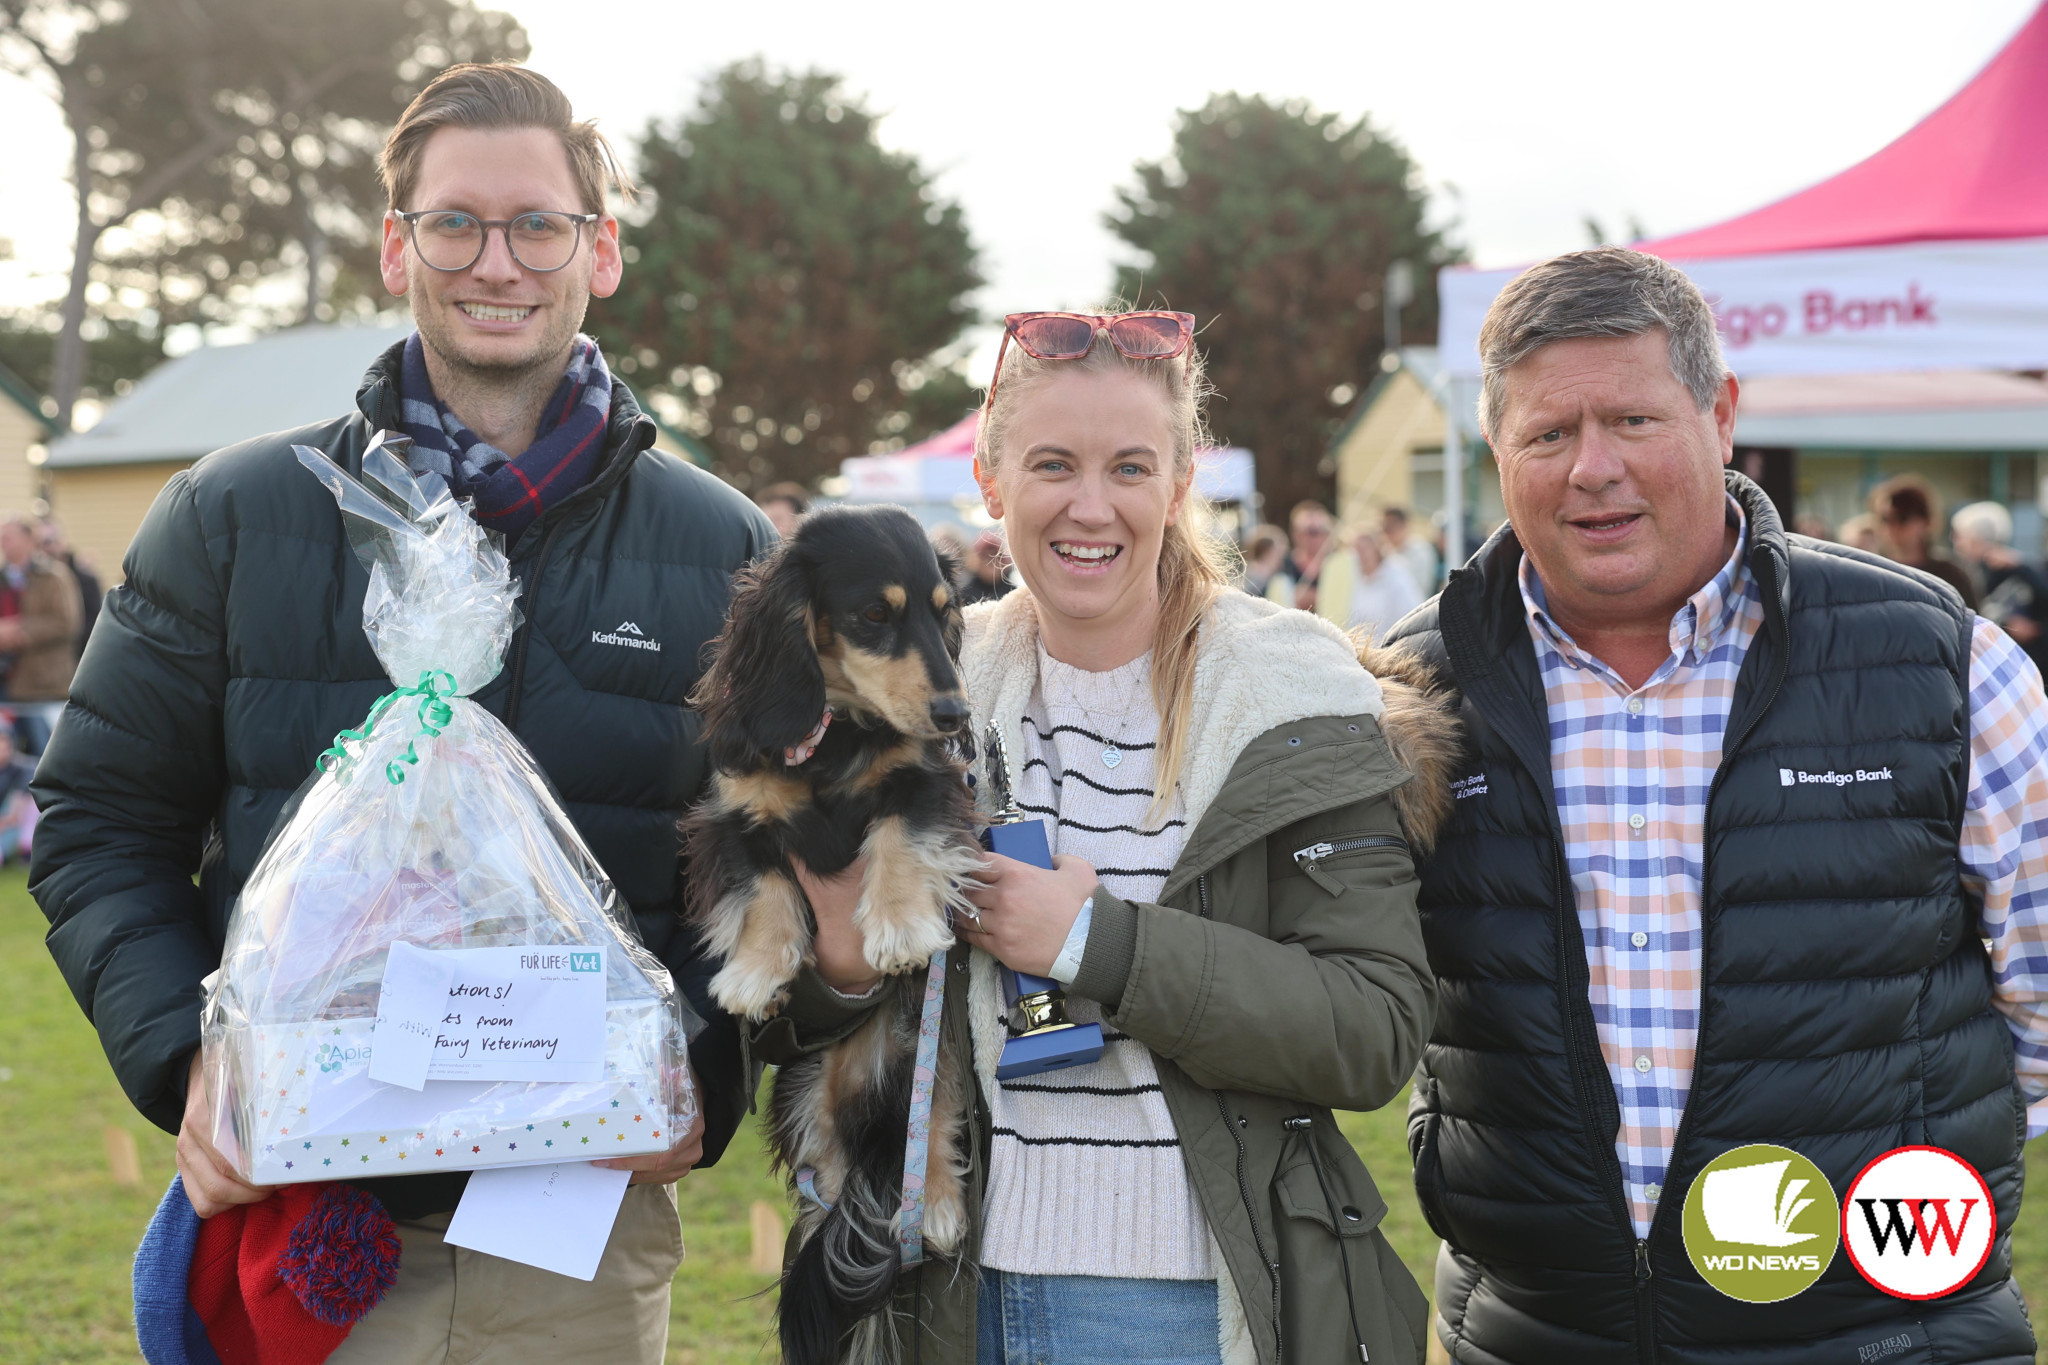 ‘Jeff’ made it back-to-back victories at the Port Fairy Dachshund Dash last weekend, taking out the Over 2 category. Jeff (who last year won the under 2 final) is pictured with proud owners Ben Holt and Kate Fergusson along with Damien Gleeson from event sponsor, Community Bank Port Fairy and District.